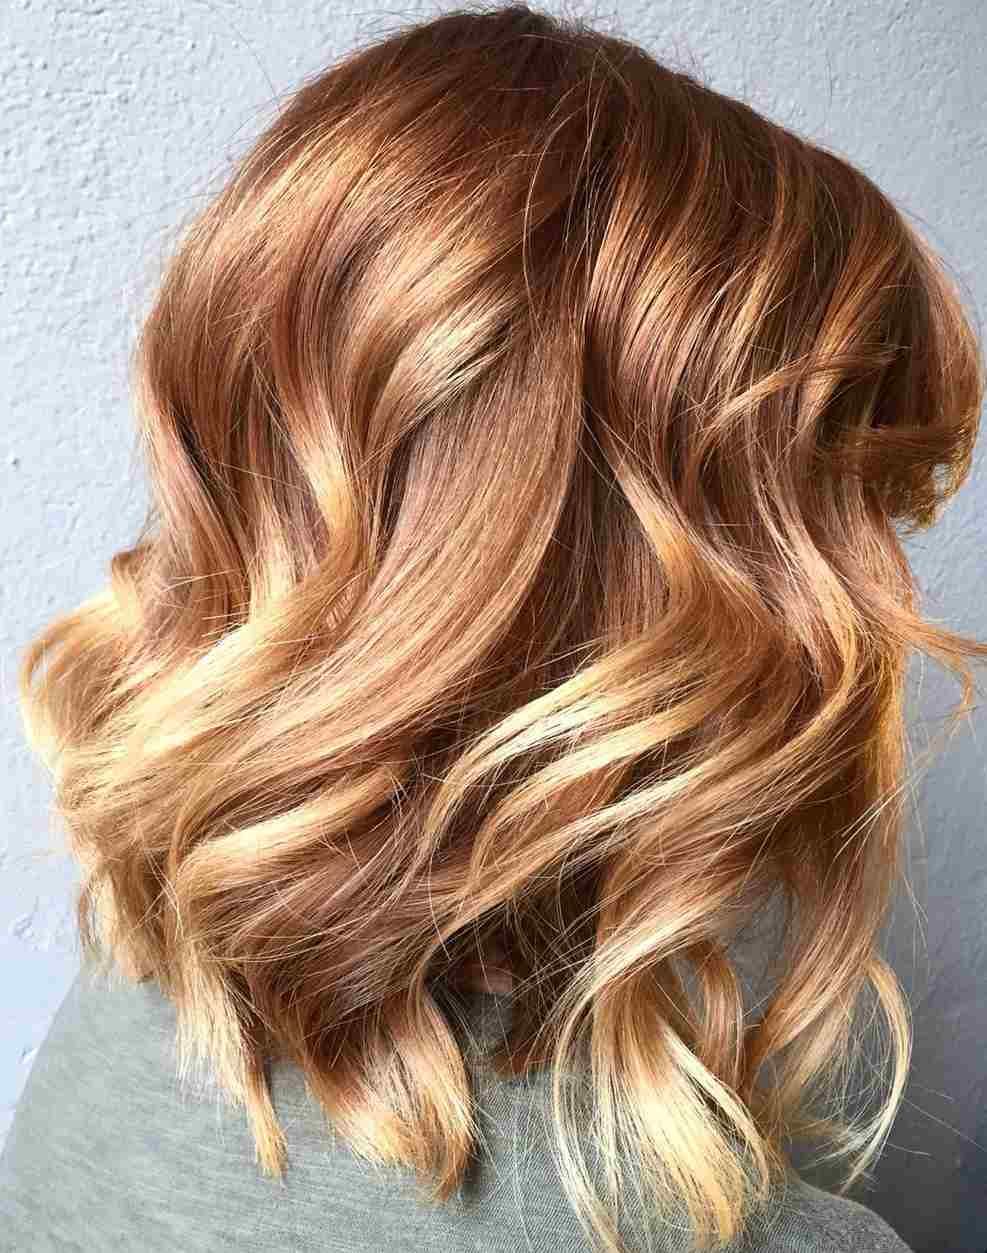 Copper red strands on blonde hair care tips hair color trends 2019